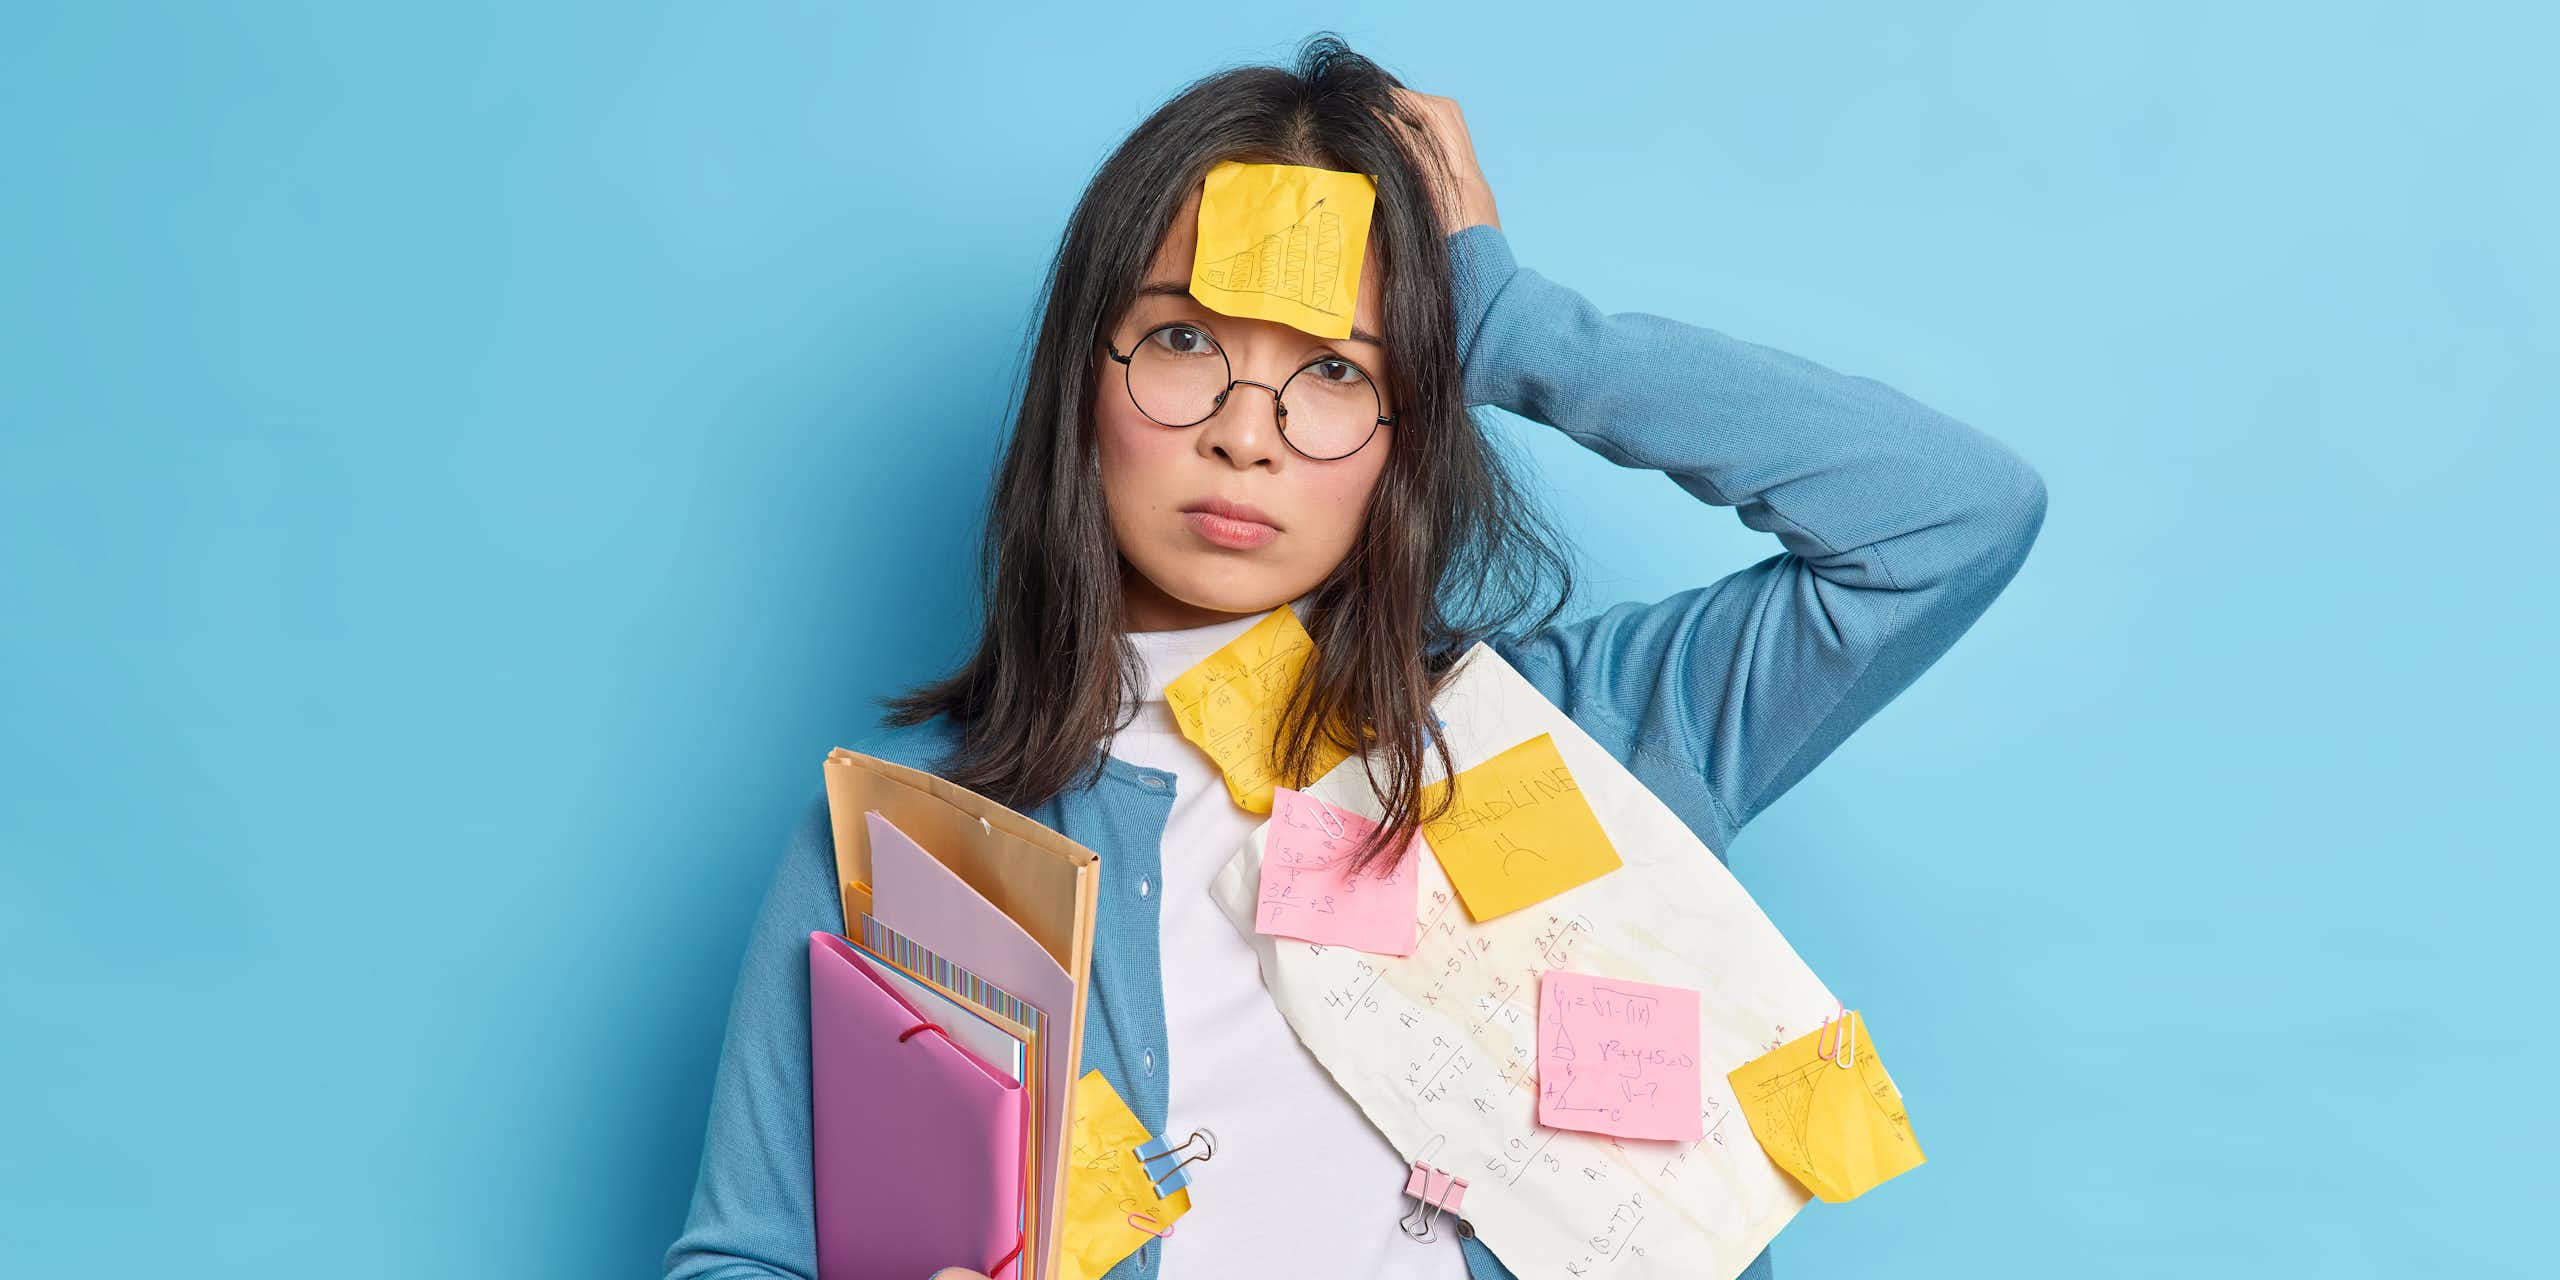 Forgetful woman covered in post-it notes and papers.